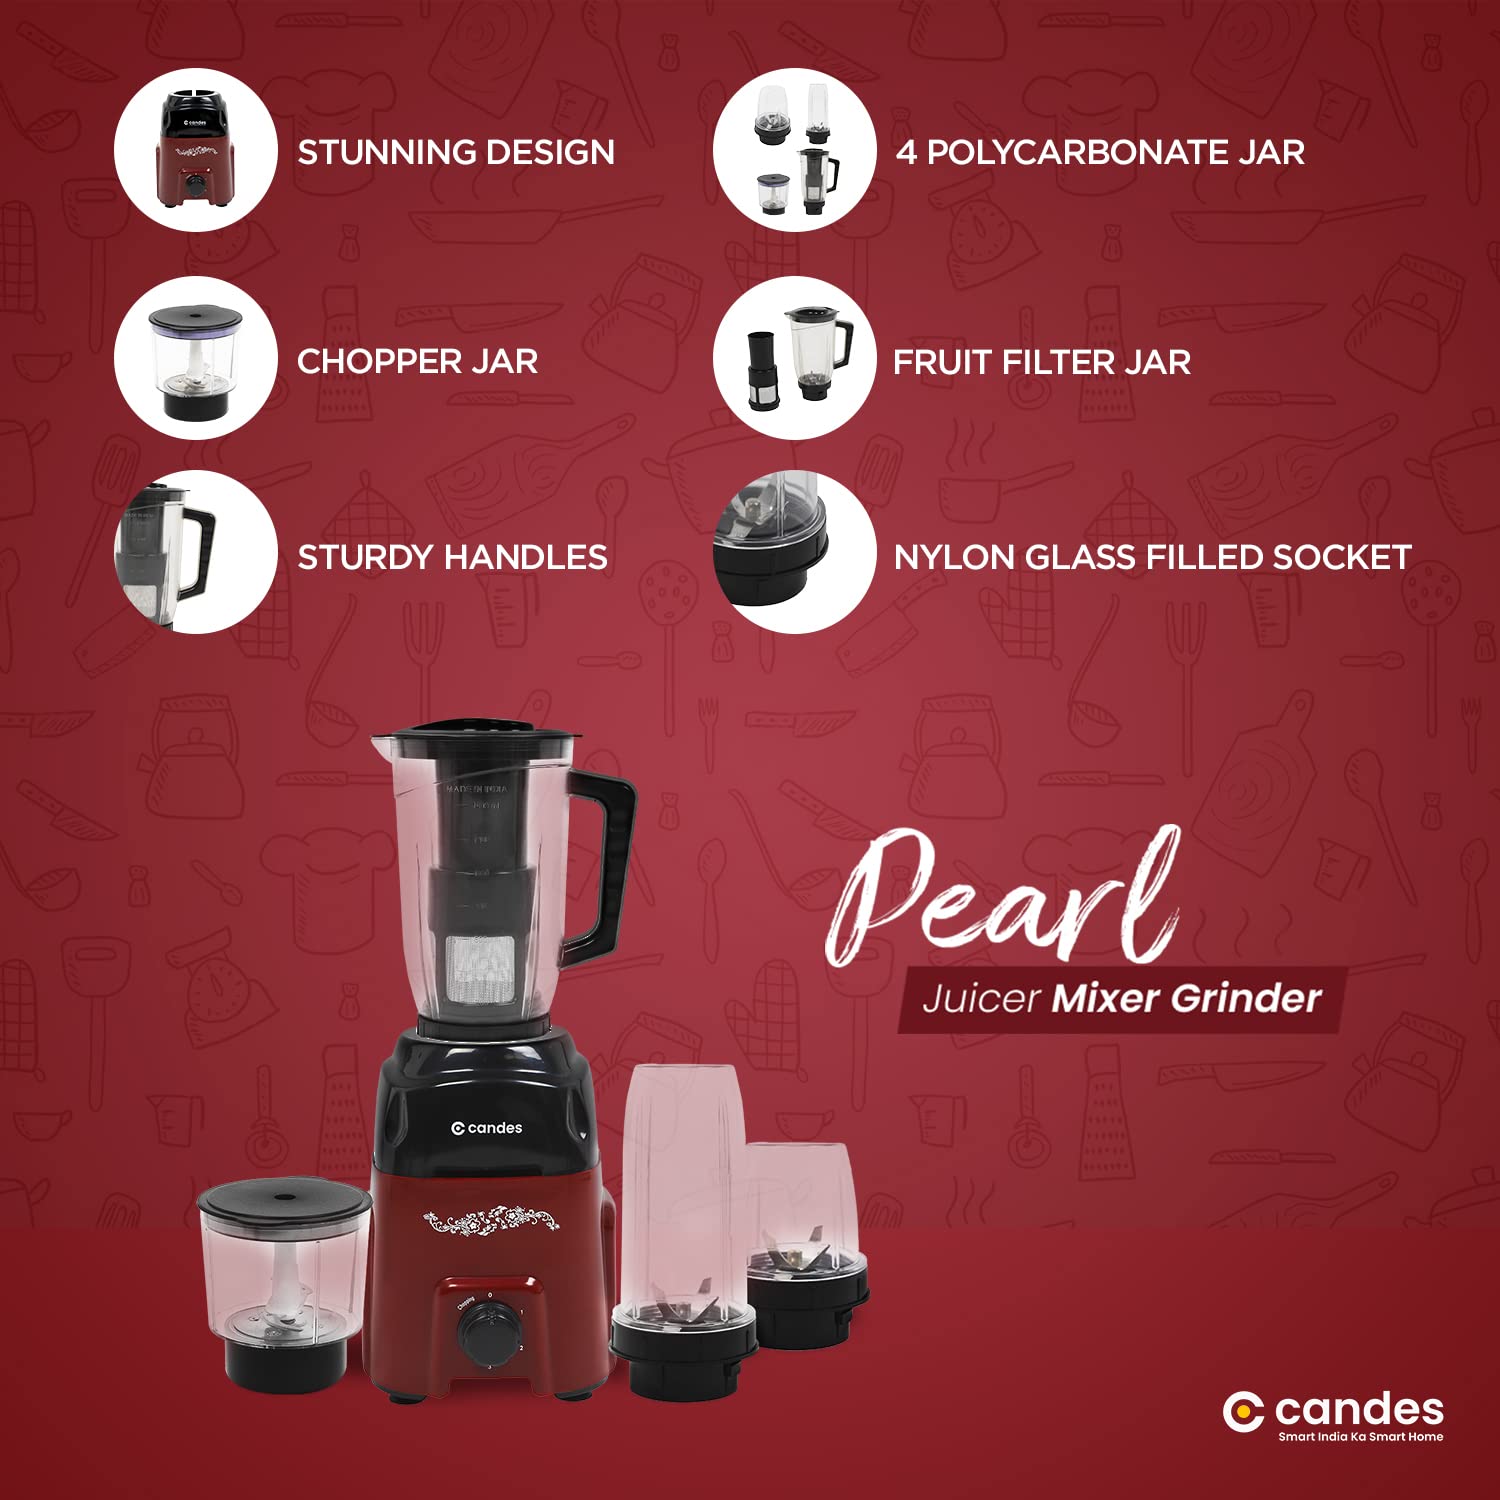 Candes Pearl 600 W Mixer Grinder 4 Jars - Black, Red (1 Year Warranty + 2 Year on Motor Only)